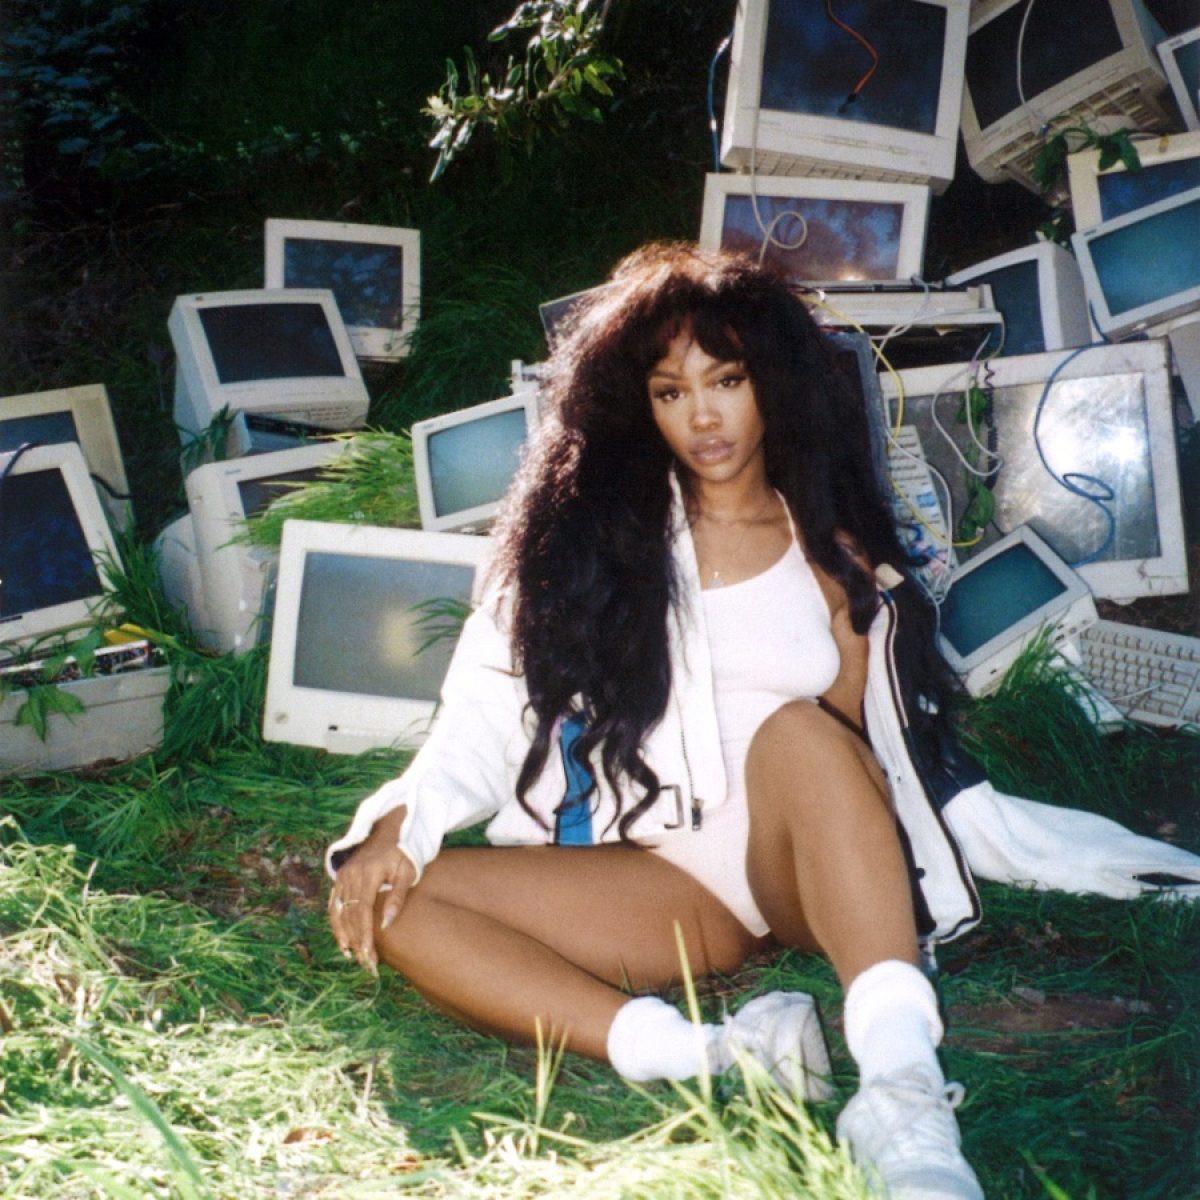 Listen To “CTRL (Deluxe)” By SZA